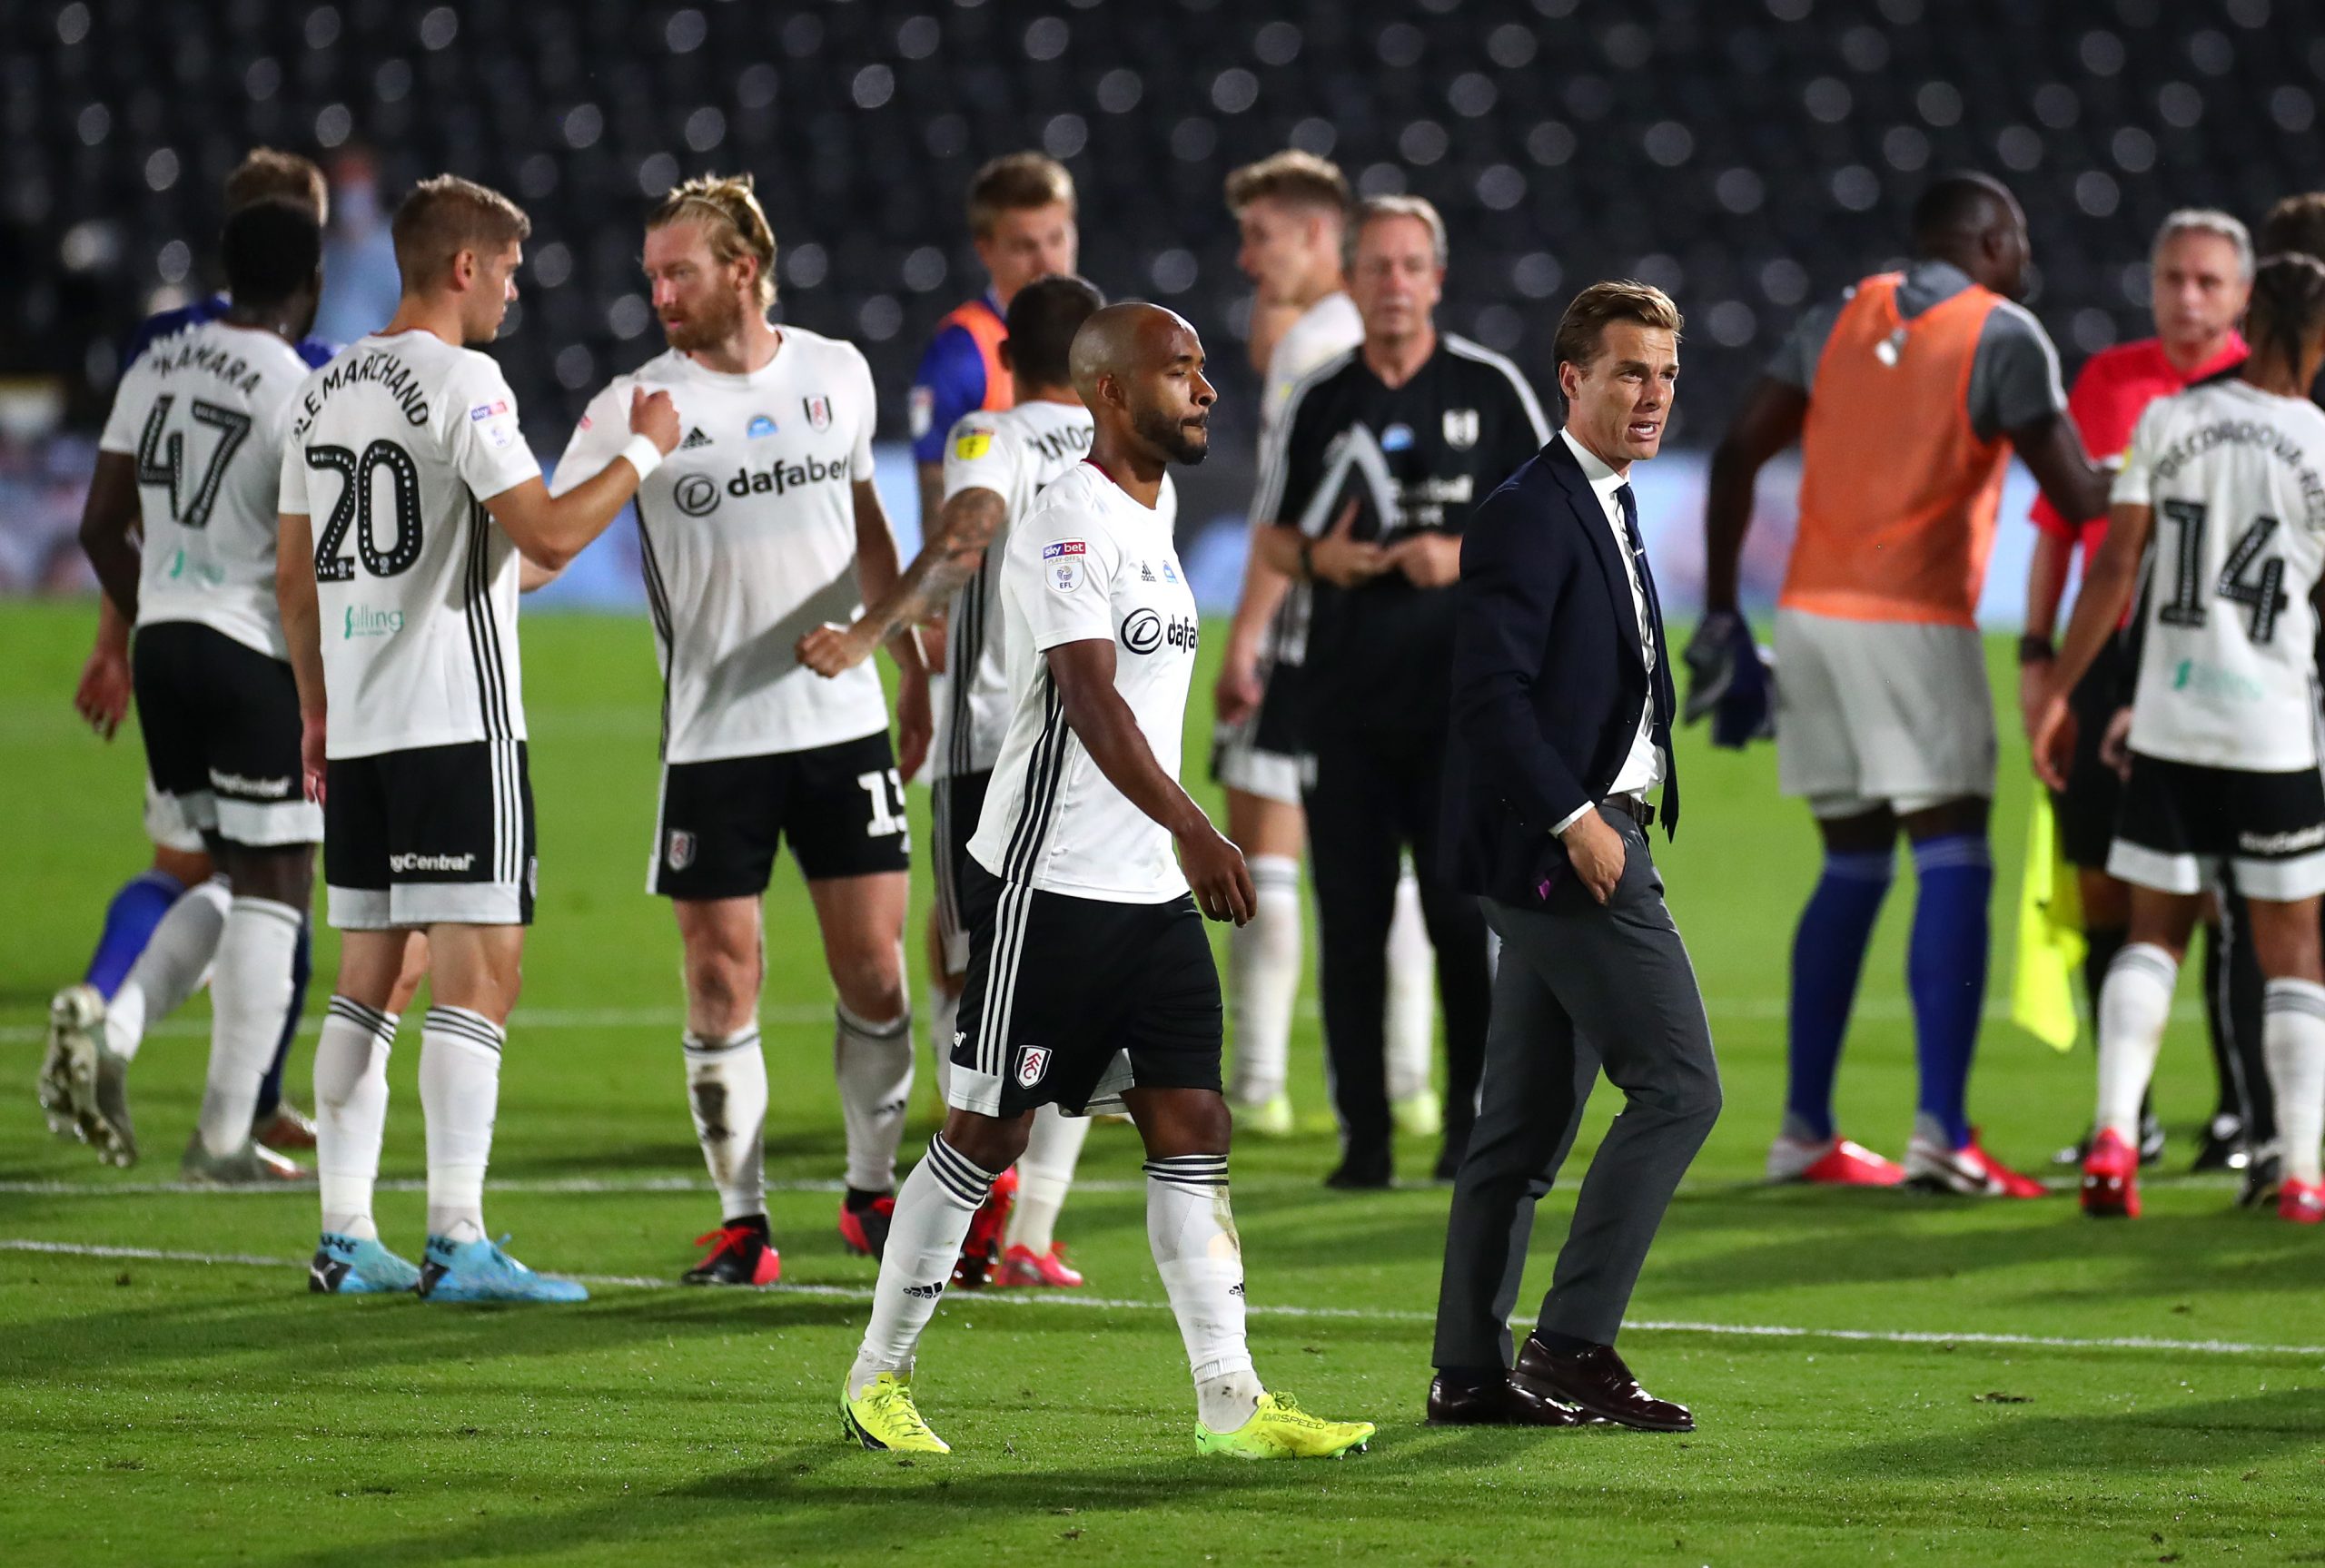 LONDON, ENGLAND - JULY 30: Scott Parker, Manager of Fulham reacts during the Sky Bet Championship Play Off Semi-final 2nd Leg match between Fulham and Cardiff City at Craven Cottage on July 30, 2020 in London, England. Football Stadiums around Europe remain empty due to the Coronavirus Pandemic as Government social distancing laws prohibit fans inside venues resulting in all fixtures being played behind closed doors. (Photo by Clive Rose/Getty Images)